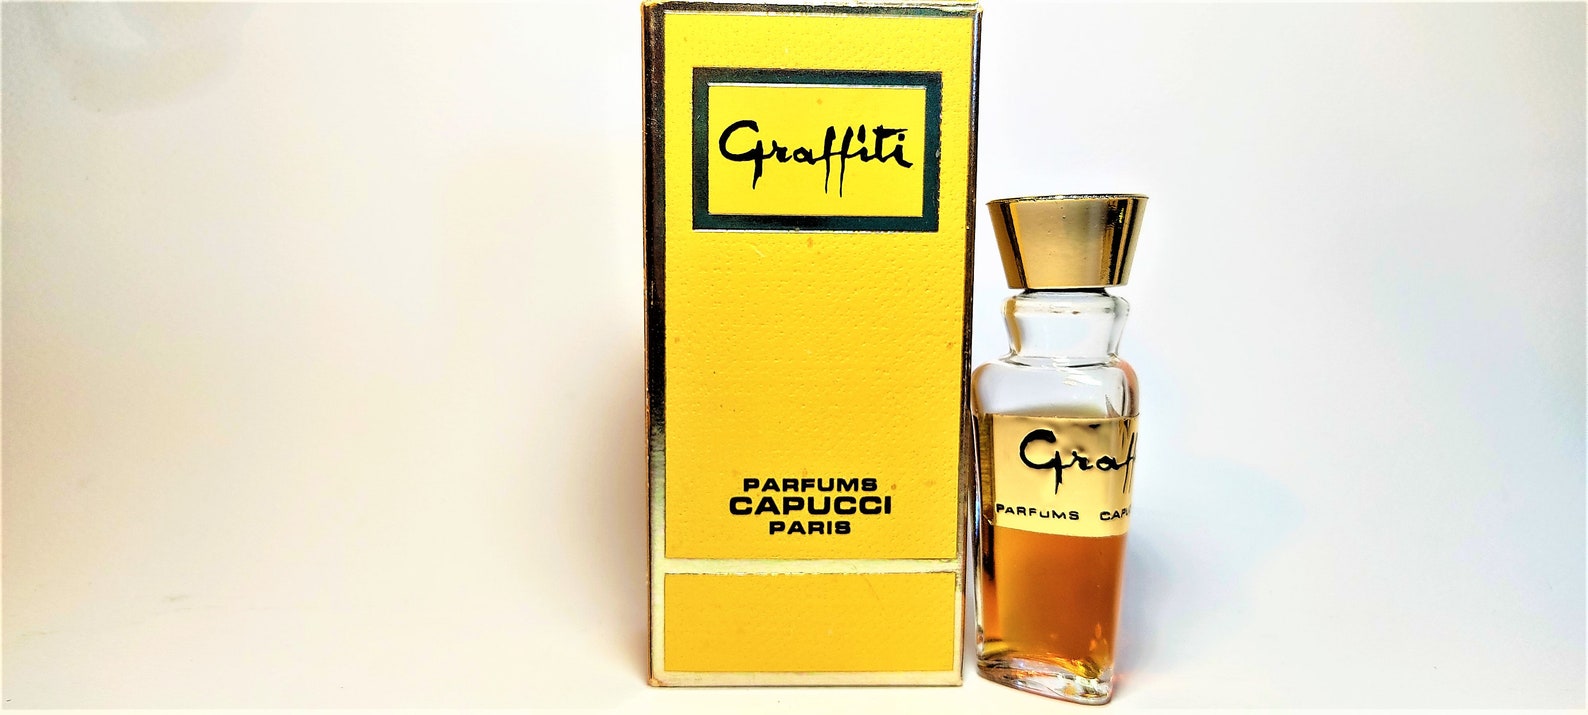 Graffiti Parfums by Great Brands Made in Paris Pure Parfume 15 - Etsy